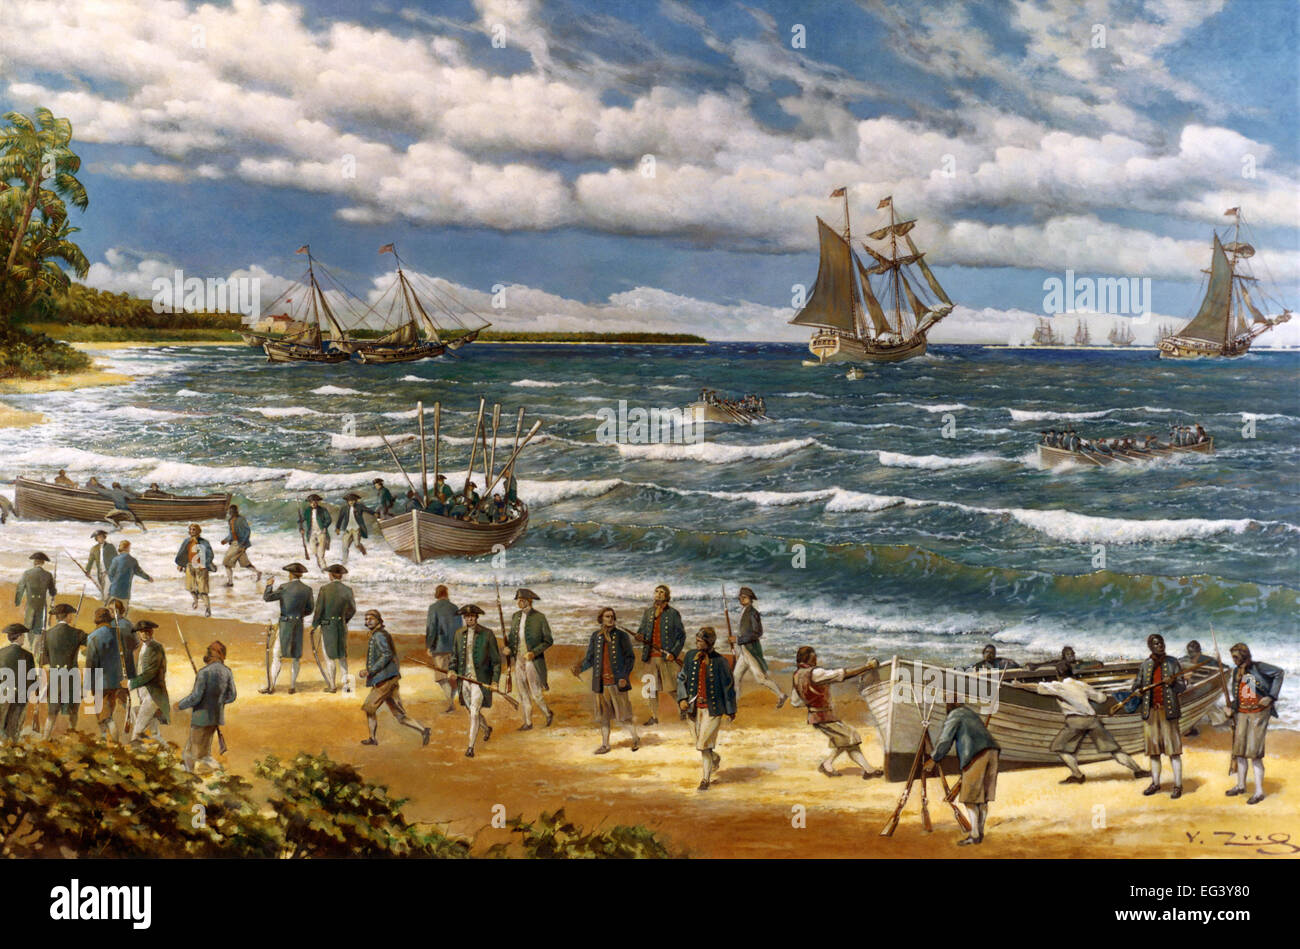 US MARINE CORPS - Continental Marines land on New Providence Island, Bahamas, 3 March 1776 during the Battle of Nassau . This was the  first amphibious landing of the US Marines. Oil painting by US Navy employee V Zveg in 1973. Stock Photo